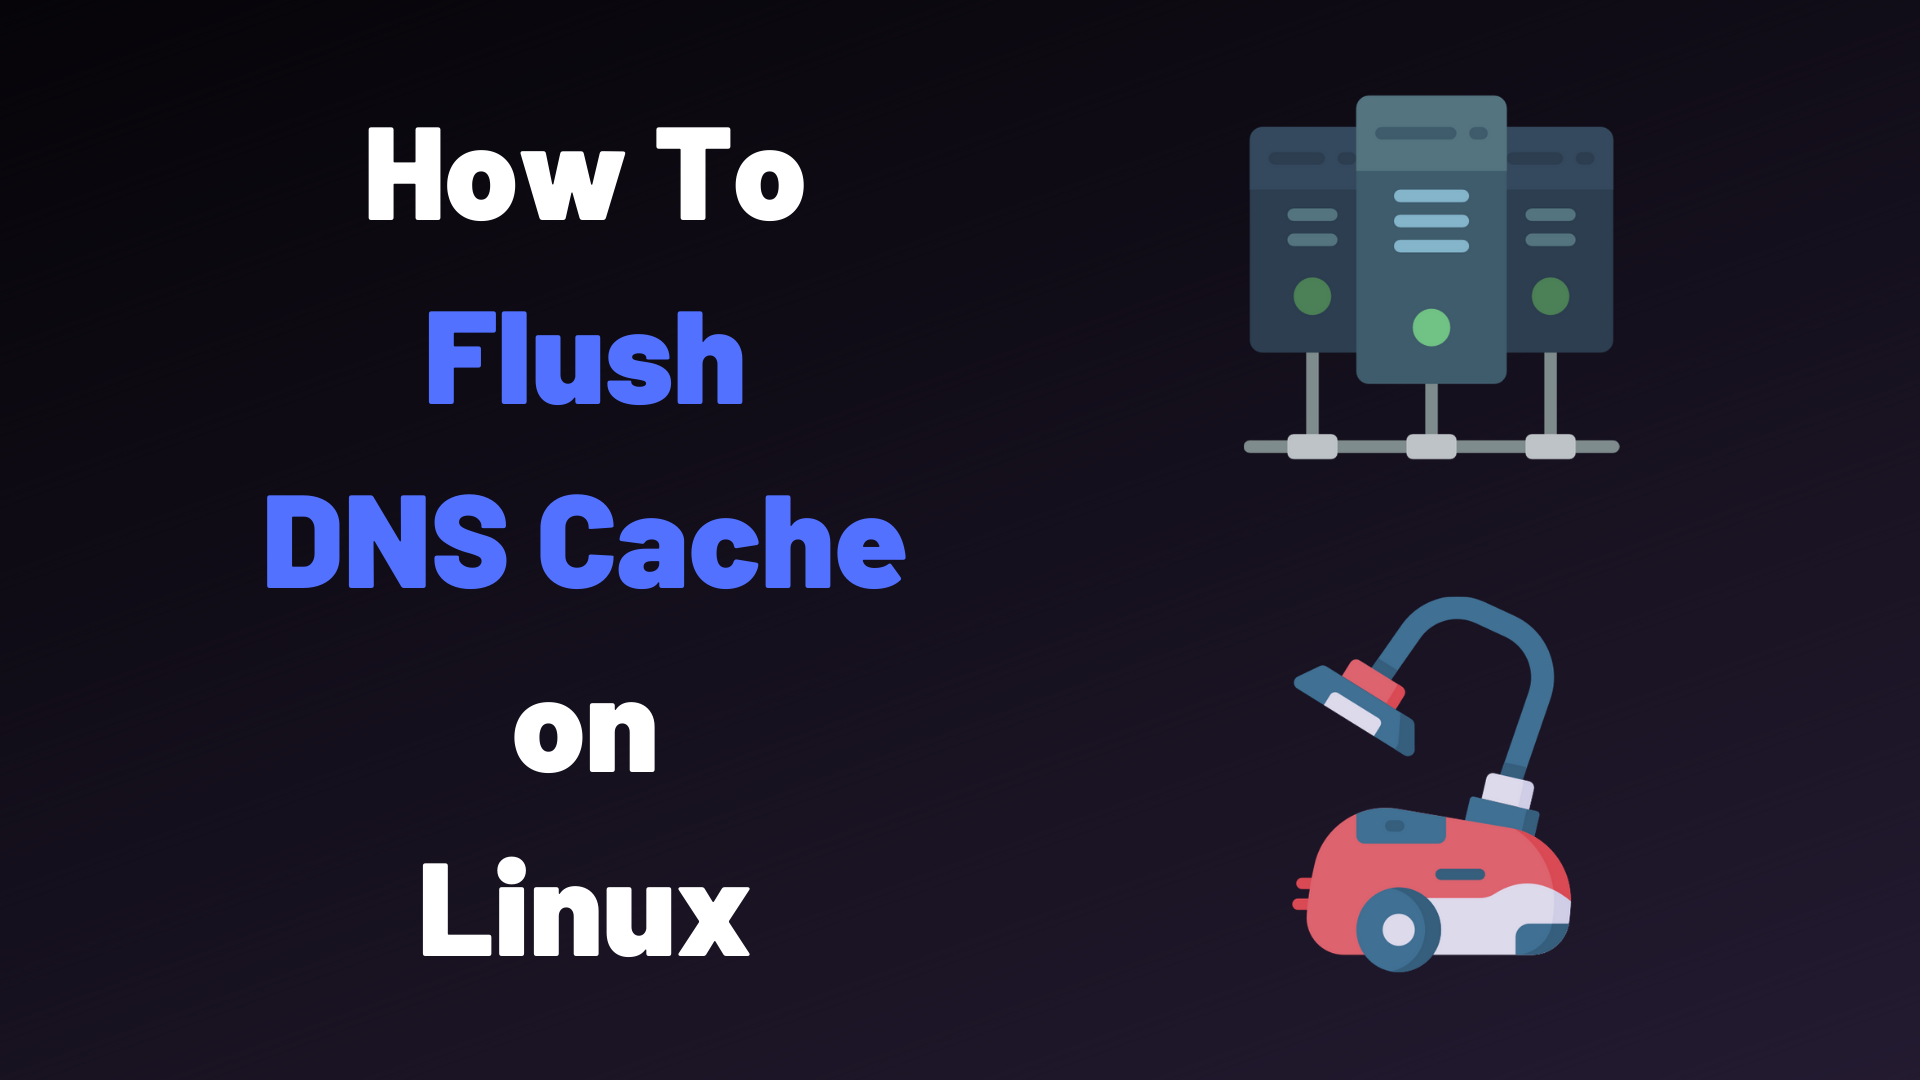 How To Flush DNS Cache on Linux